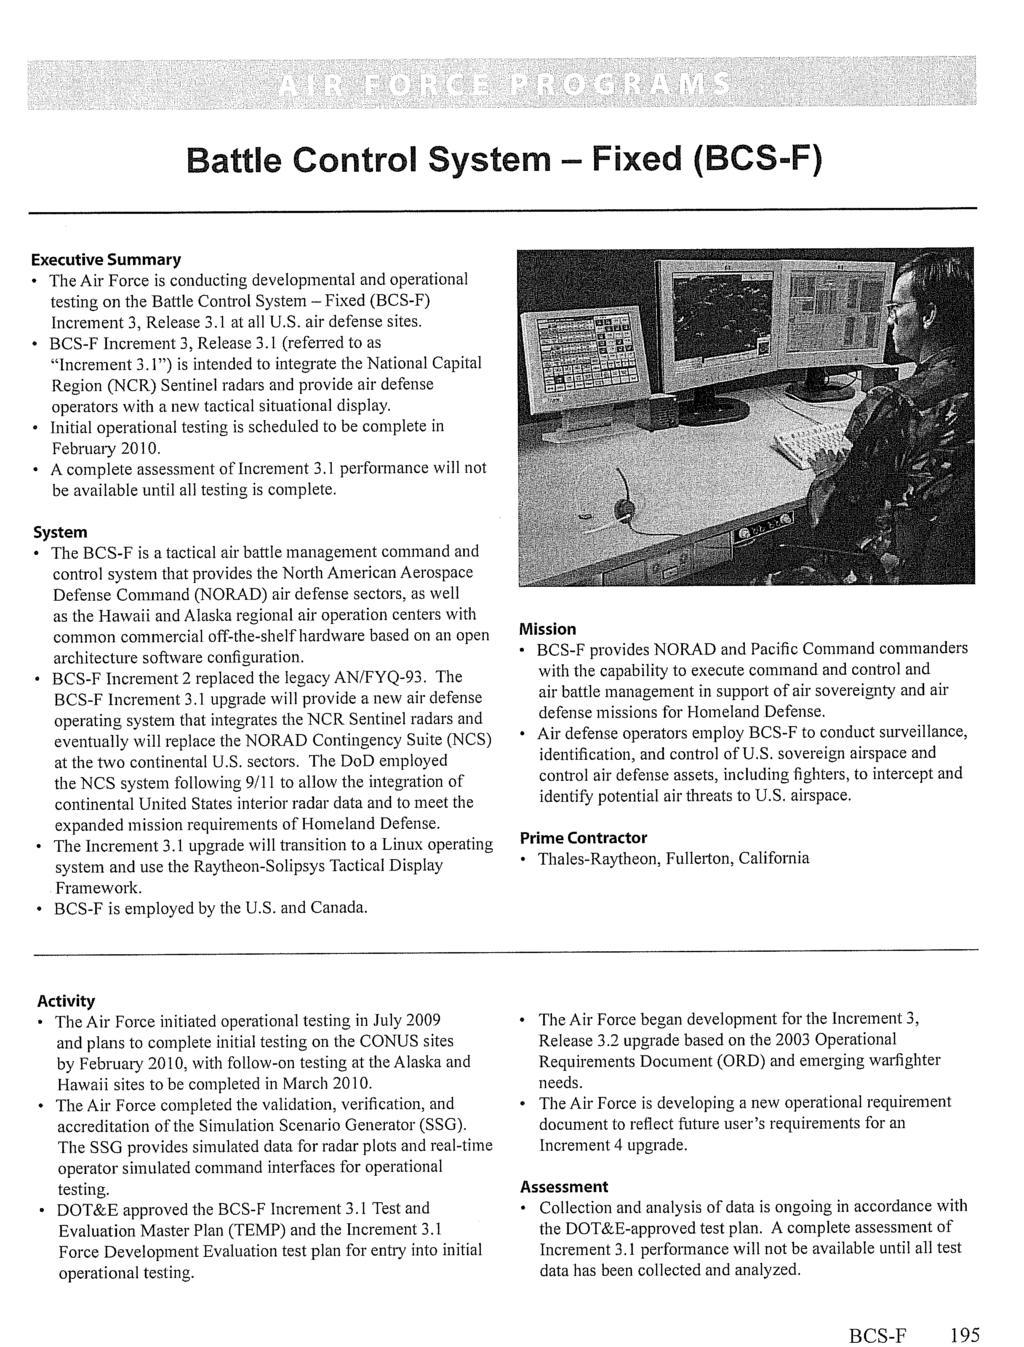 BCS-F 195 Battle Control System Fixed (BCS-F) Executive Summary The Air Force is conducting developmental and operational testing on the Battle Control System Fixed (BCS-F) Increment 3, Release 3.